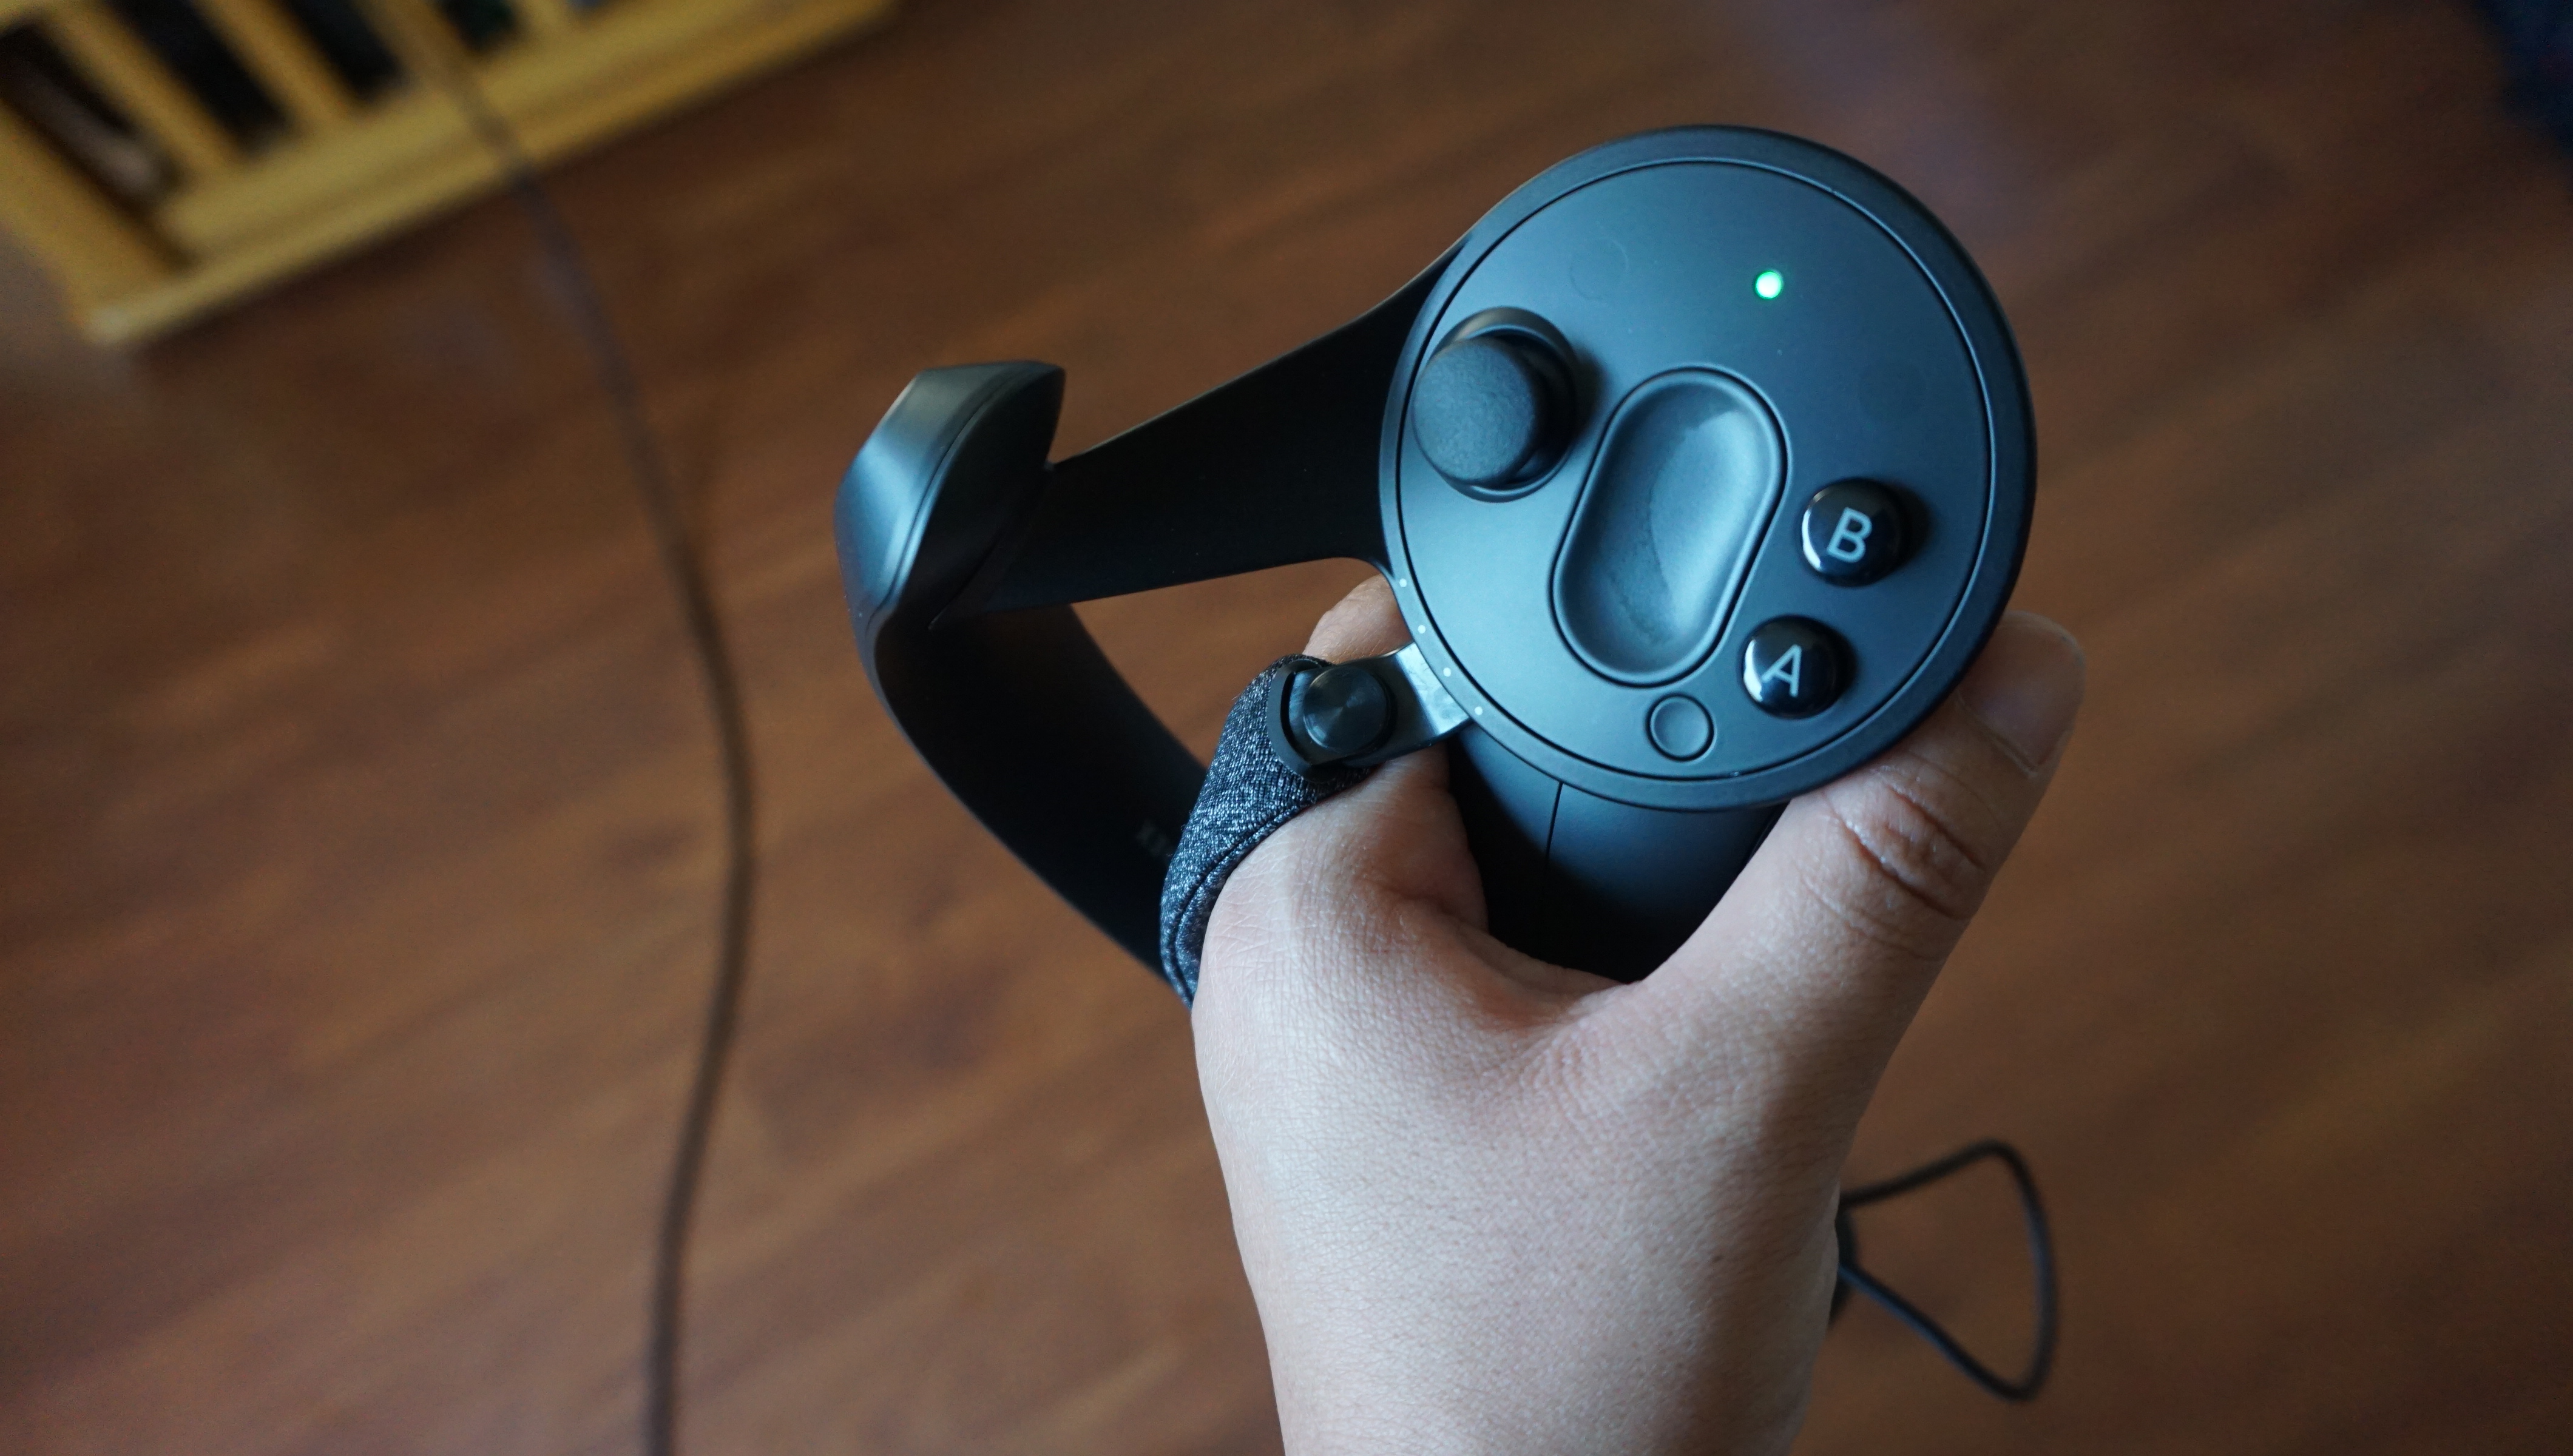 Valve Index controller in the palm of your hand